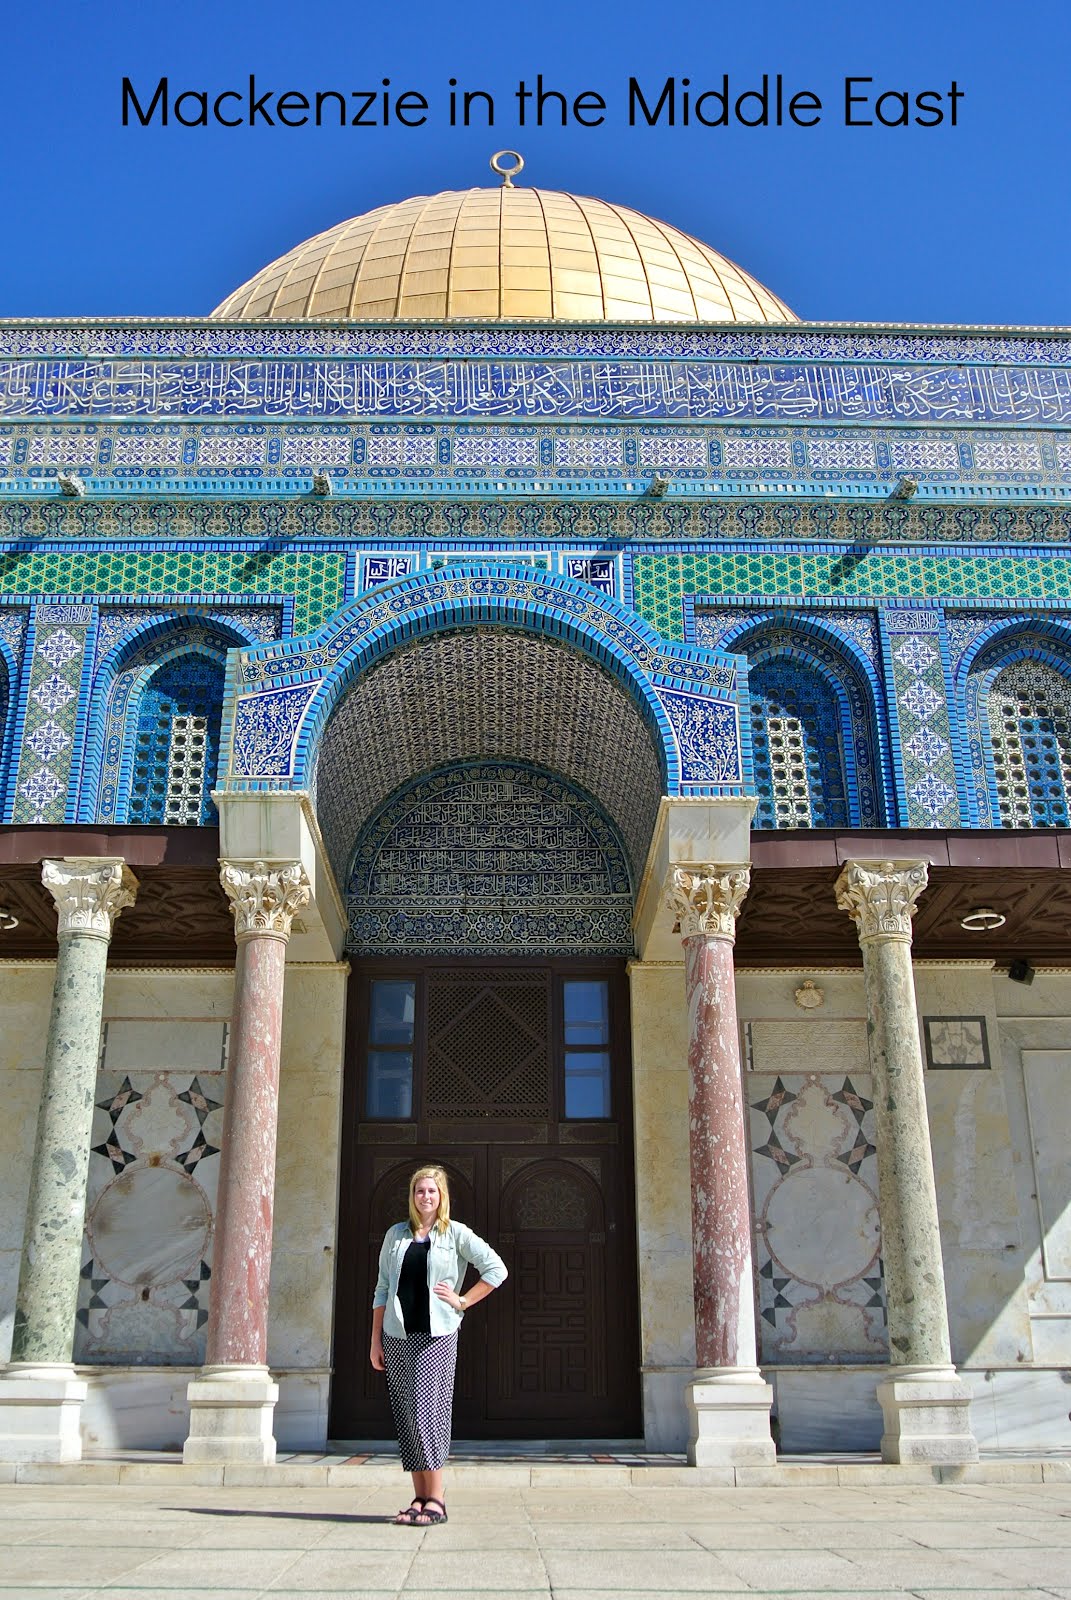 Mackenzie in the Middle East